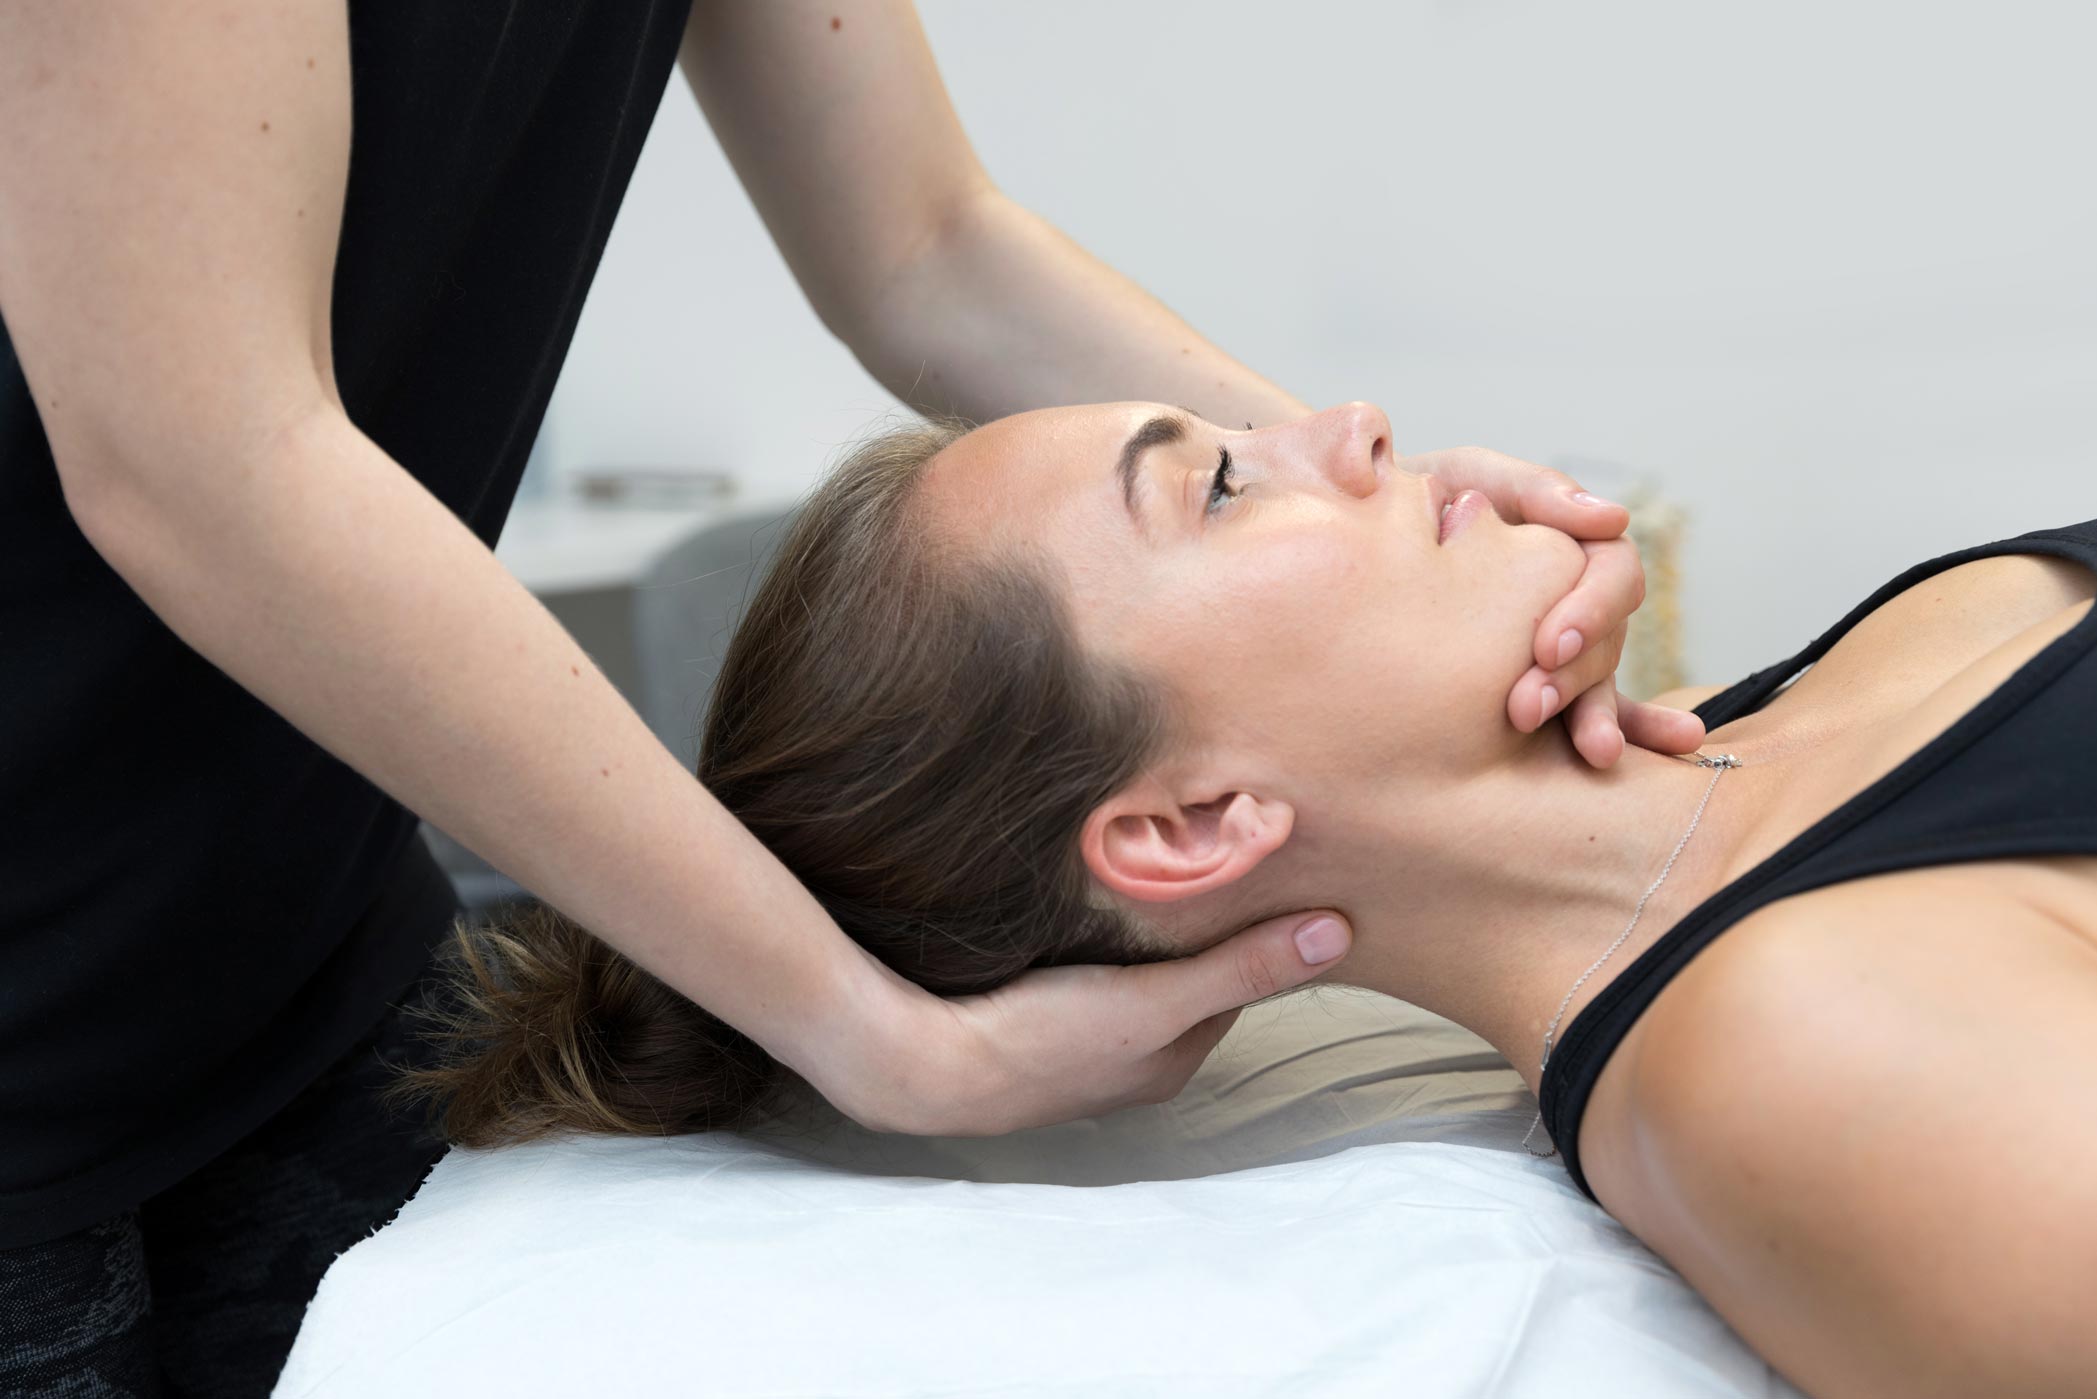 A sports massage therapist works with a patient in her Croydon clinic as part of a London health & fitness personal branding photography shoot